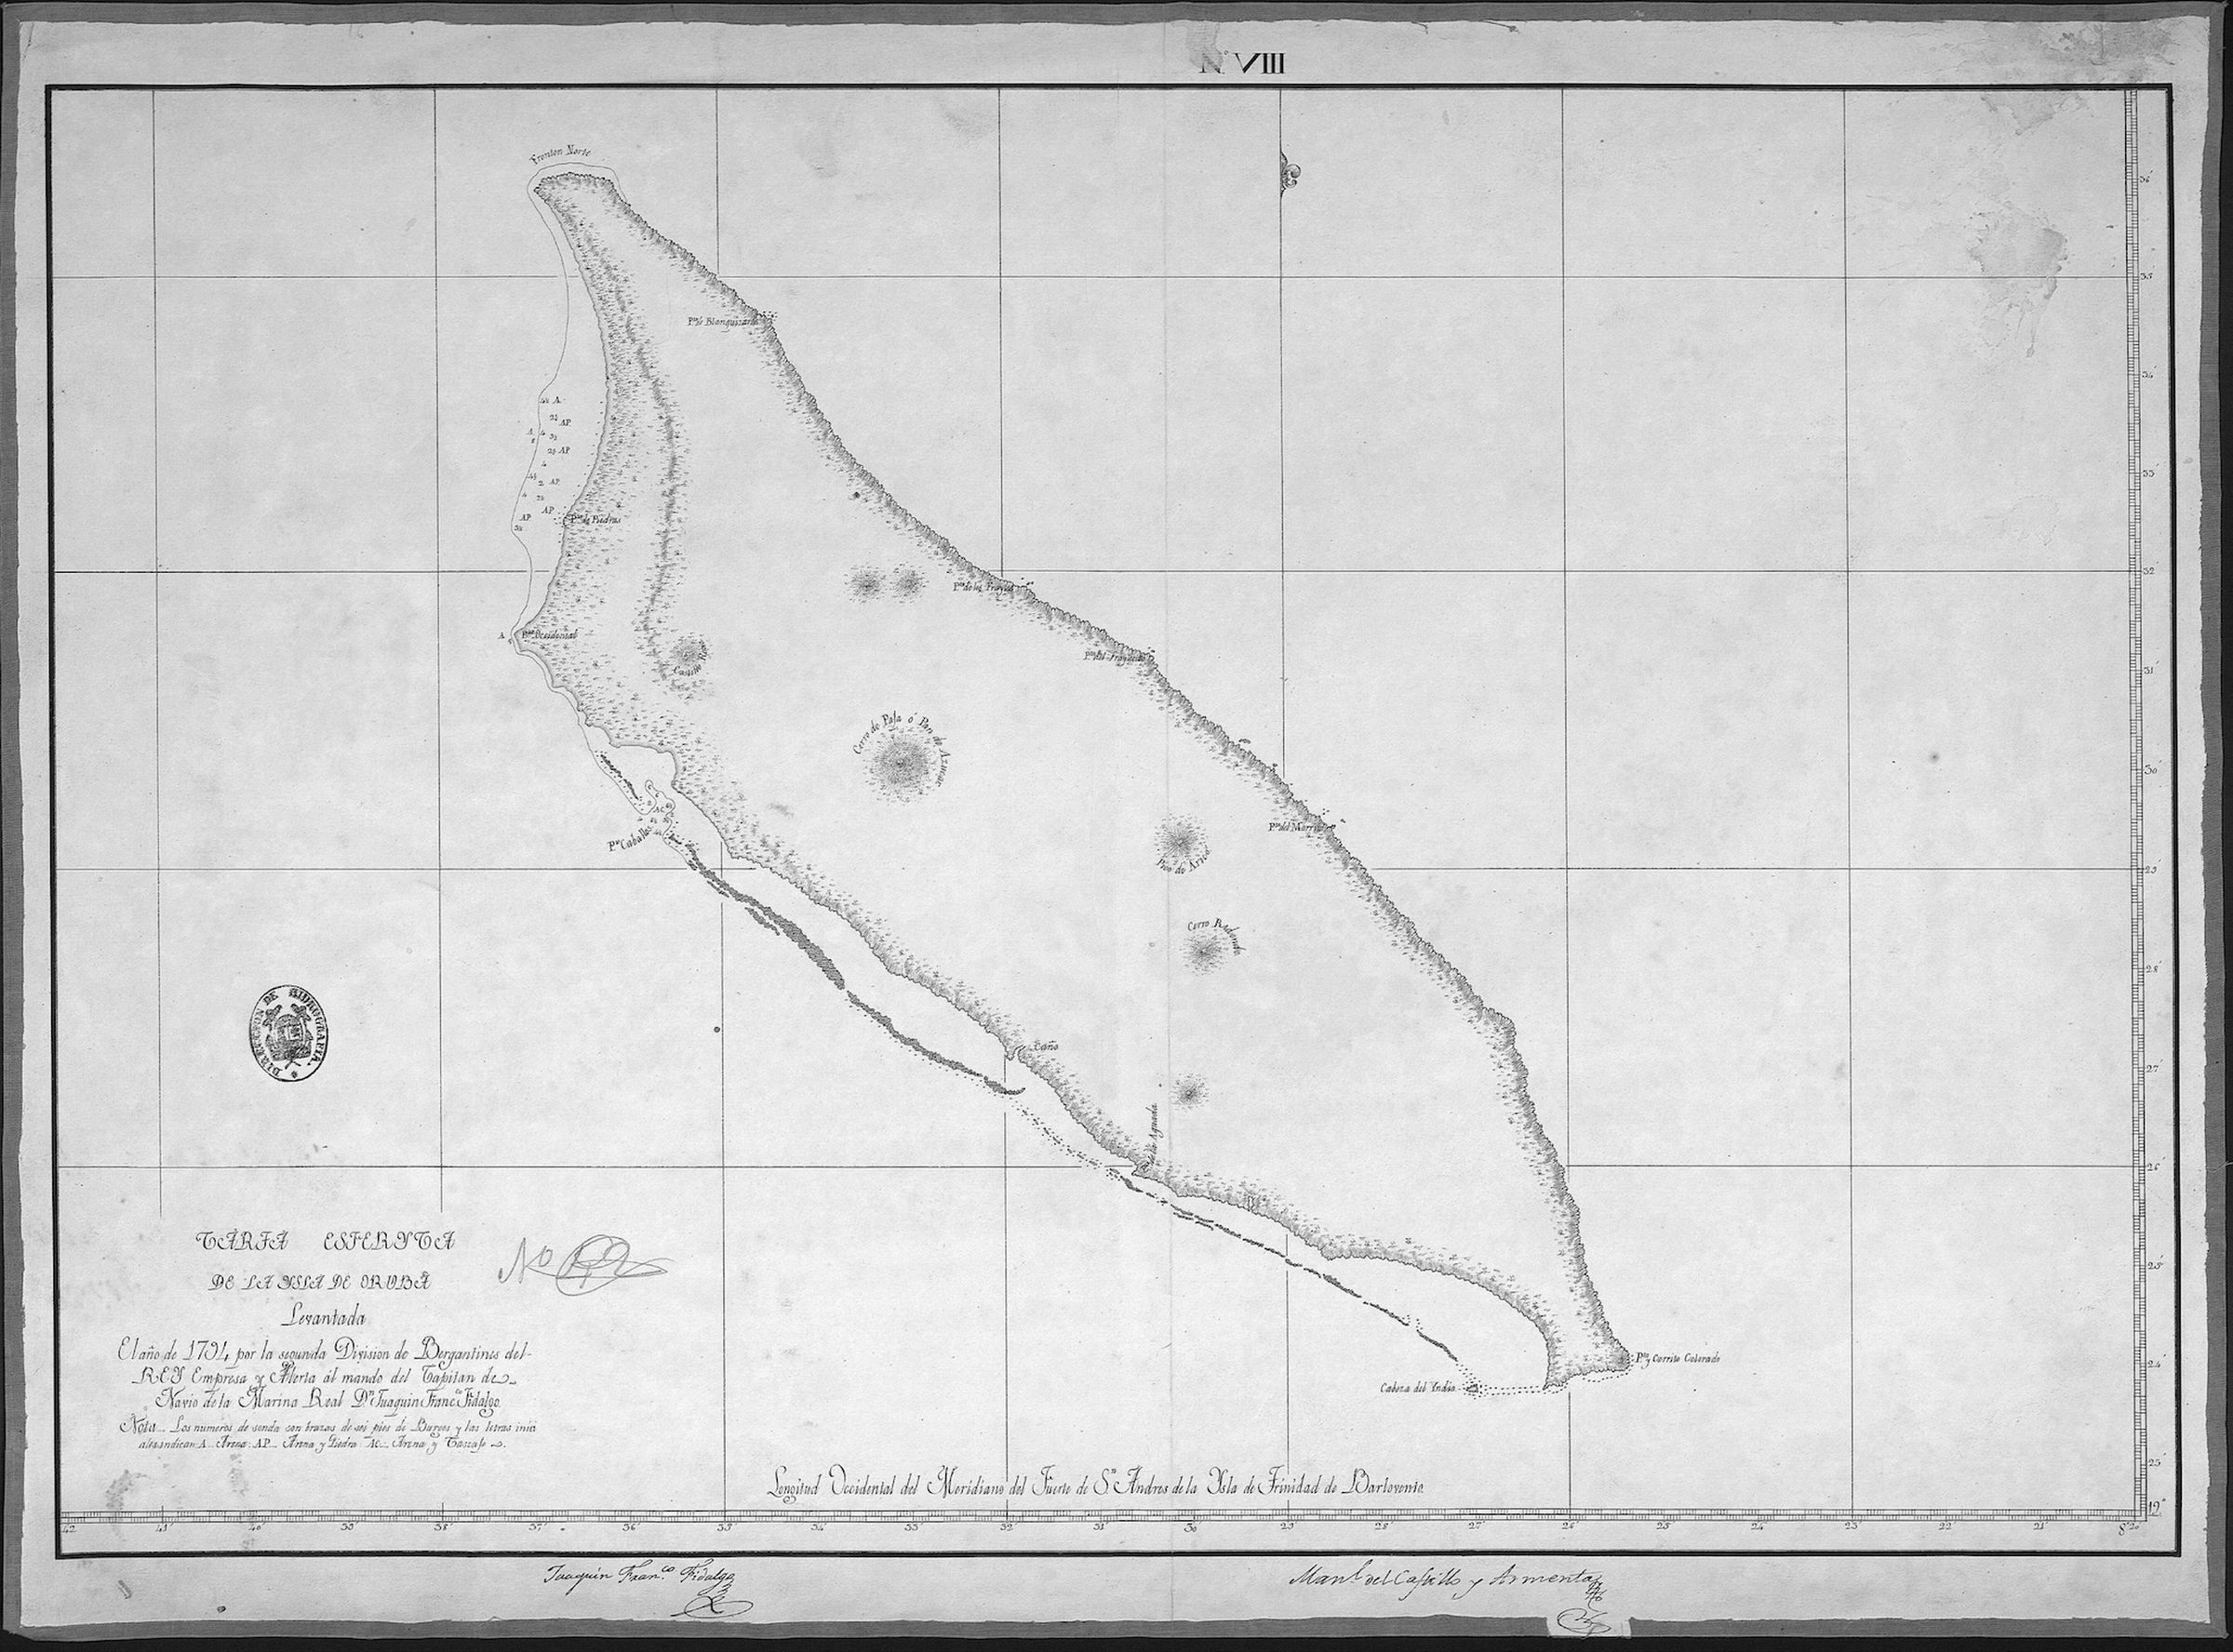 A scan of a hand-drawn map of Aruba from 1794.